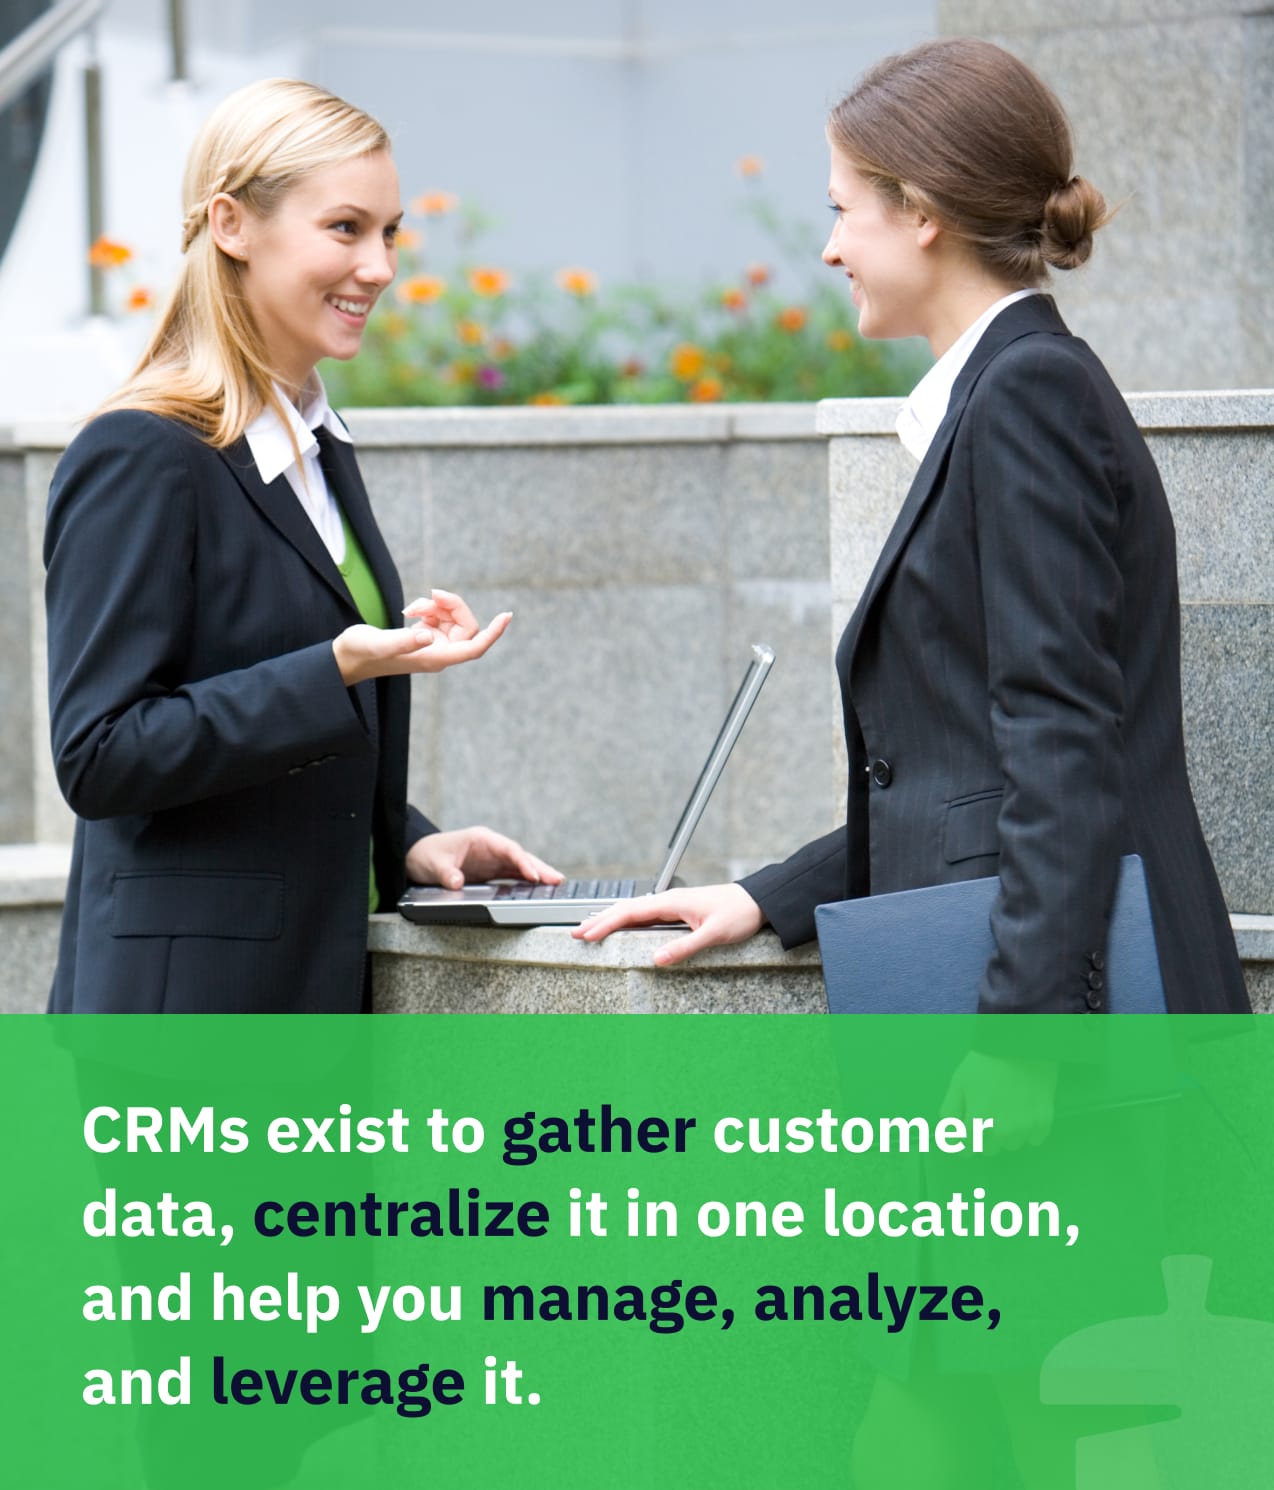 CRMs gather customer data, centralize it in one location, and help you manage, analyze, and leverage it.